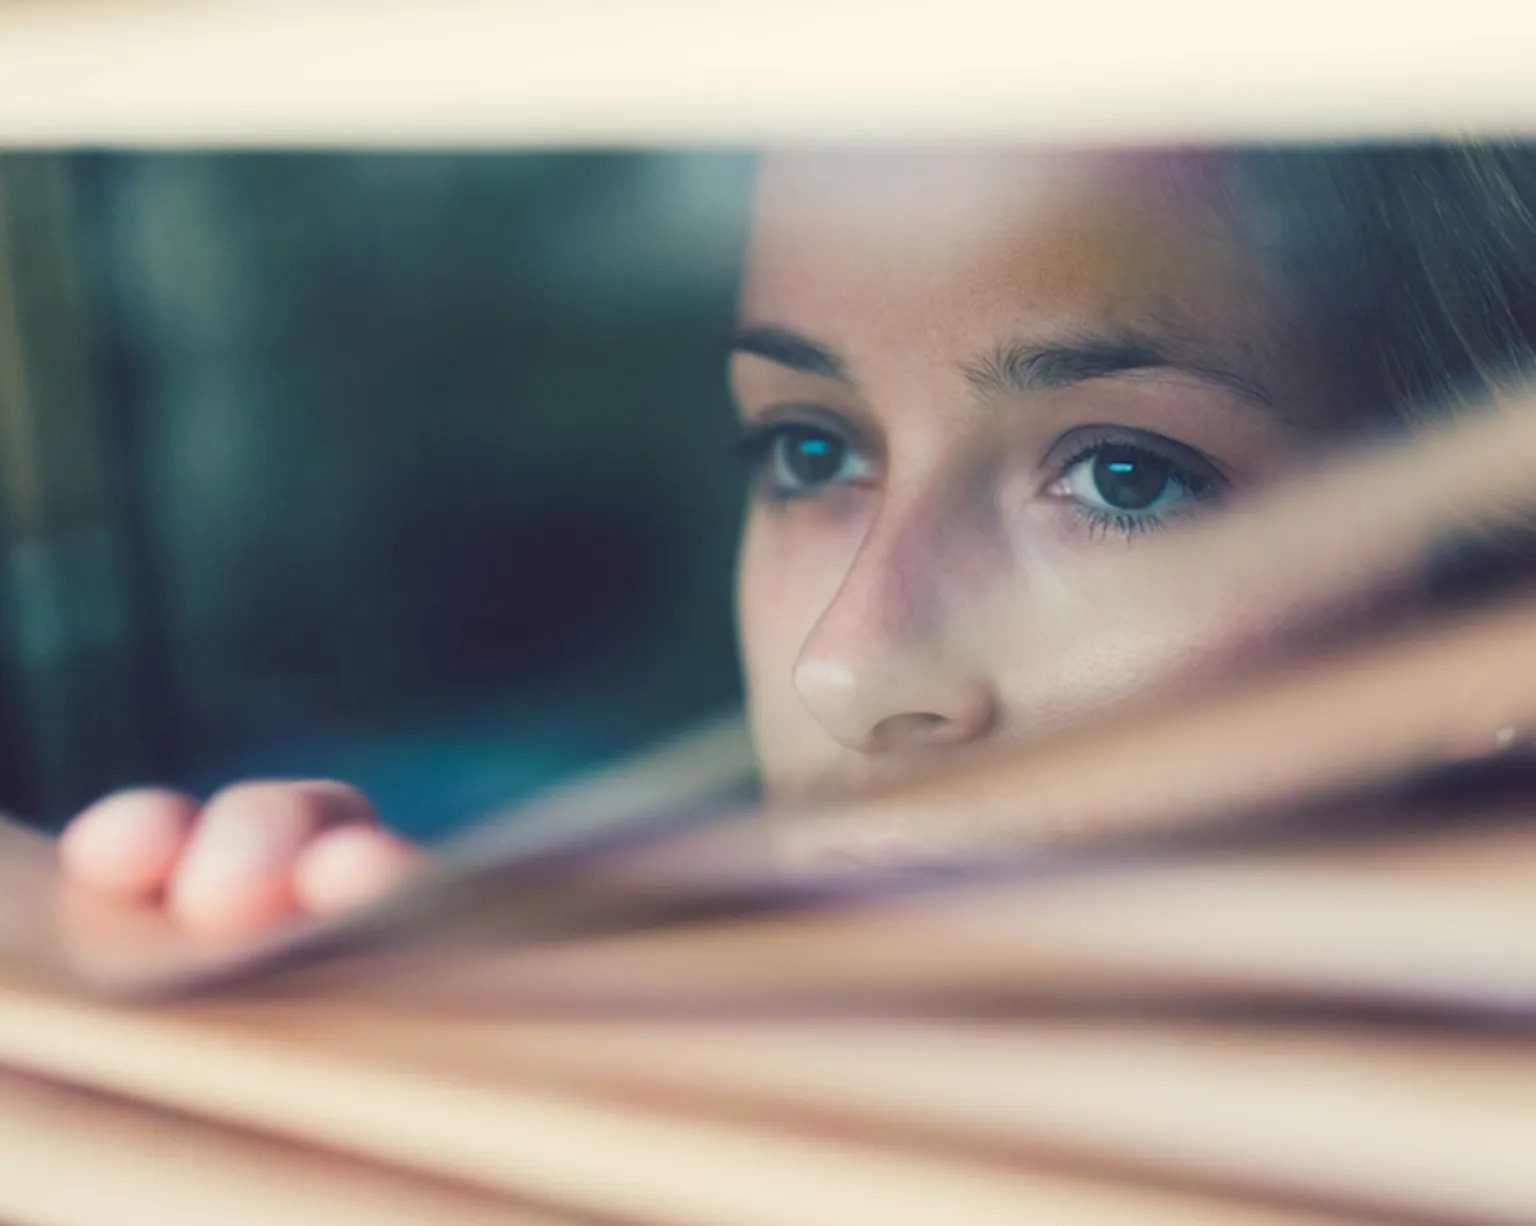 Photo of a young person peering through a window from inside.